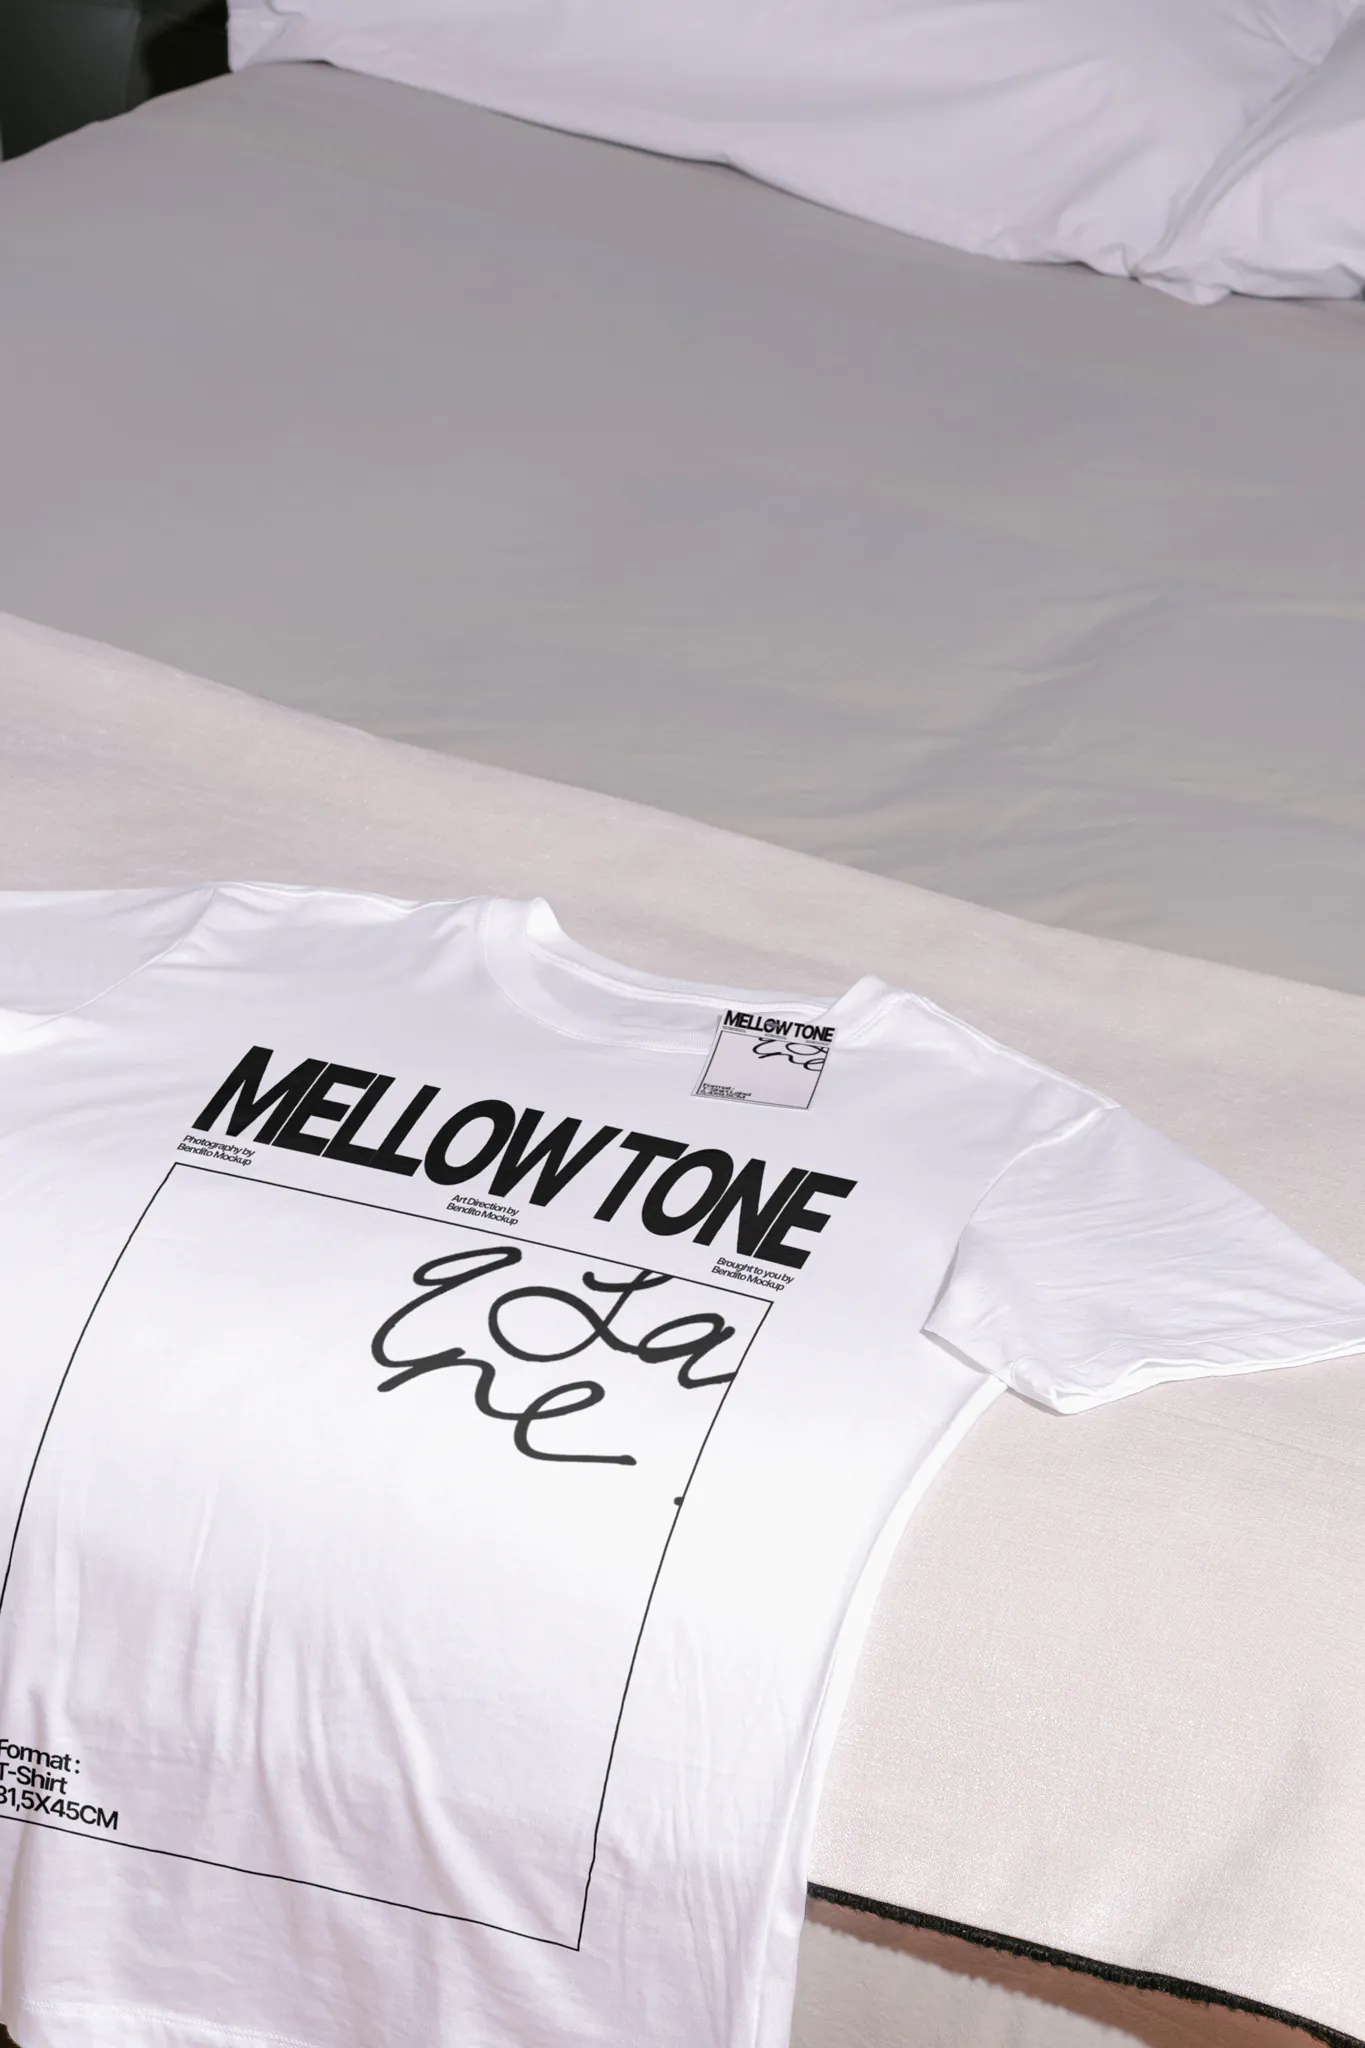 High-quality t-shirt mockup laying on a bed with white sheets. High-quality short sleeve t-shirt mockup resting on top of a blank. PSD mockup file of a white t-shirt